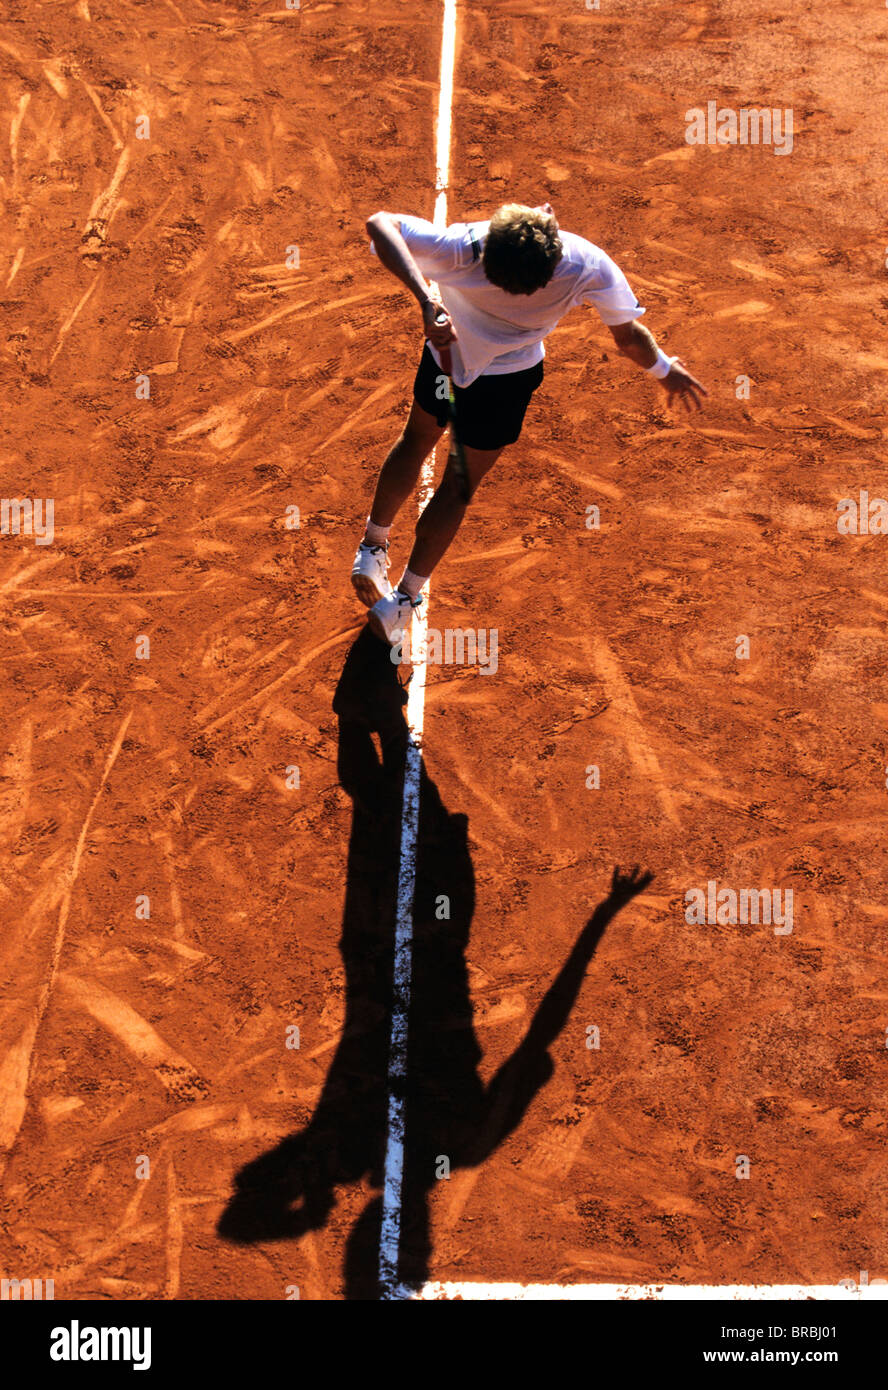 Tennis player serves on a clay court tennis court Stock Photo